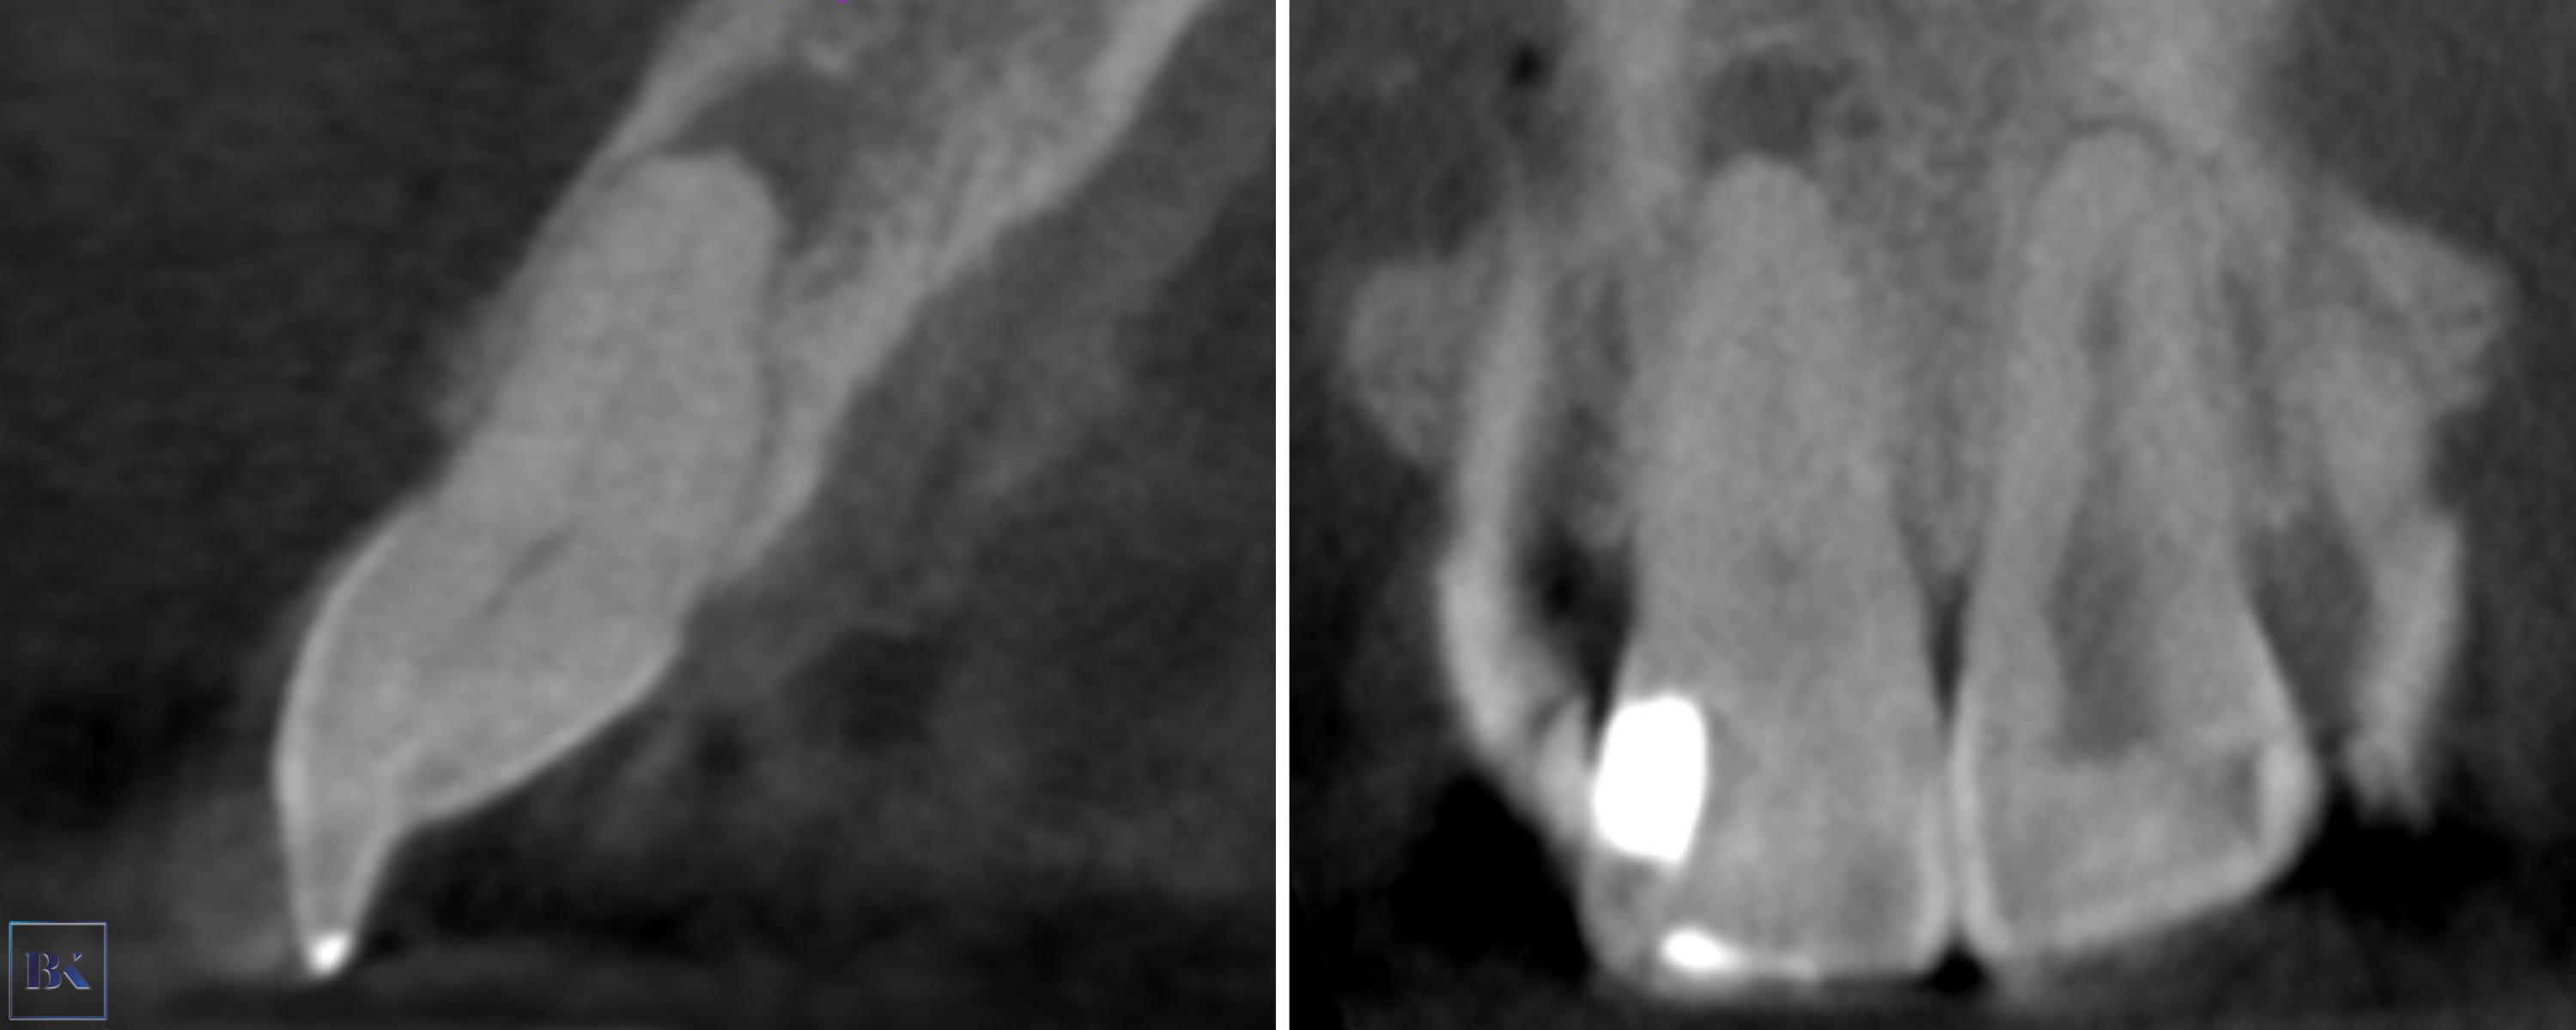 Figs. 2a & b: CBCT scan, sagittal (a) and coronal planes (b). Visible pulp canal obliteration and periapical lesion.